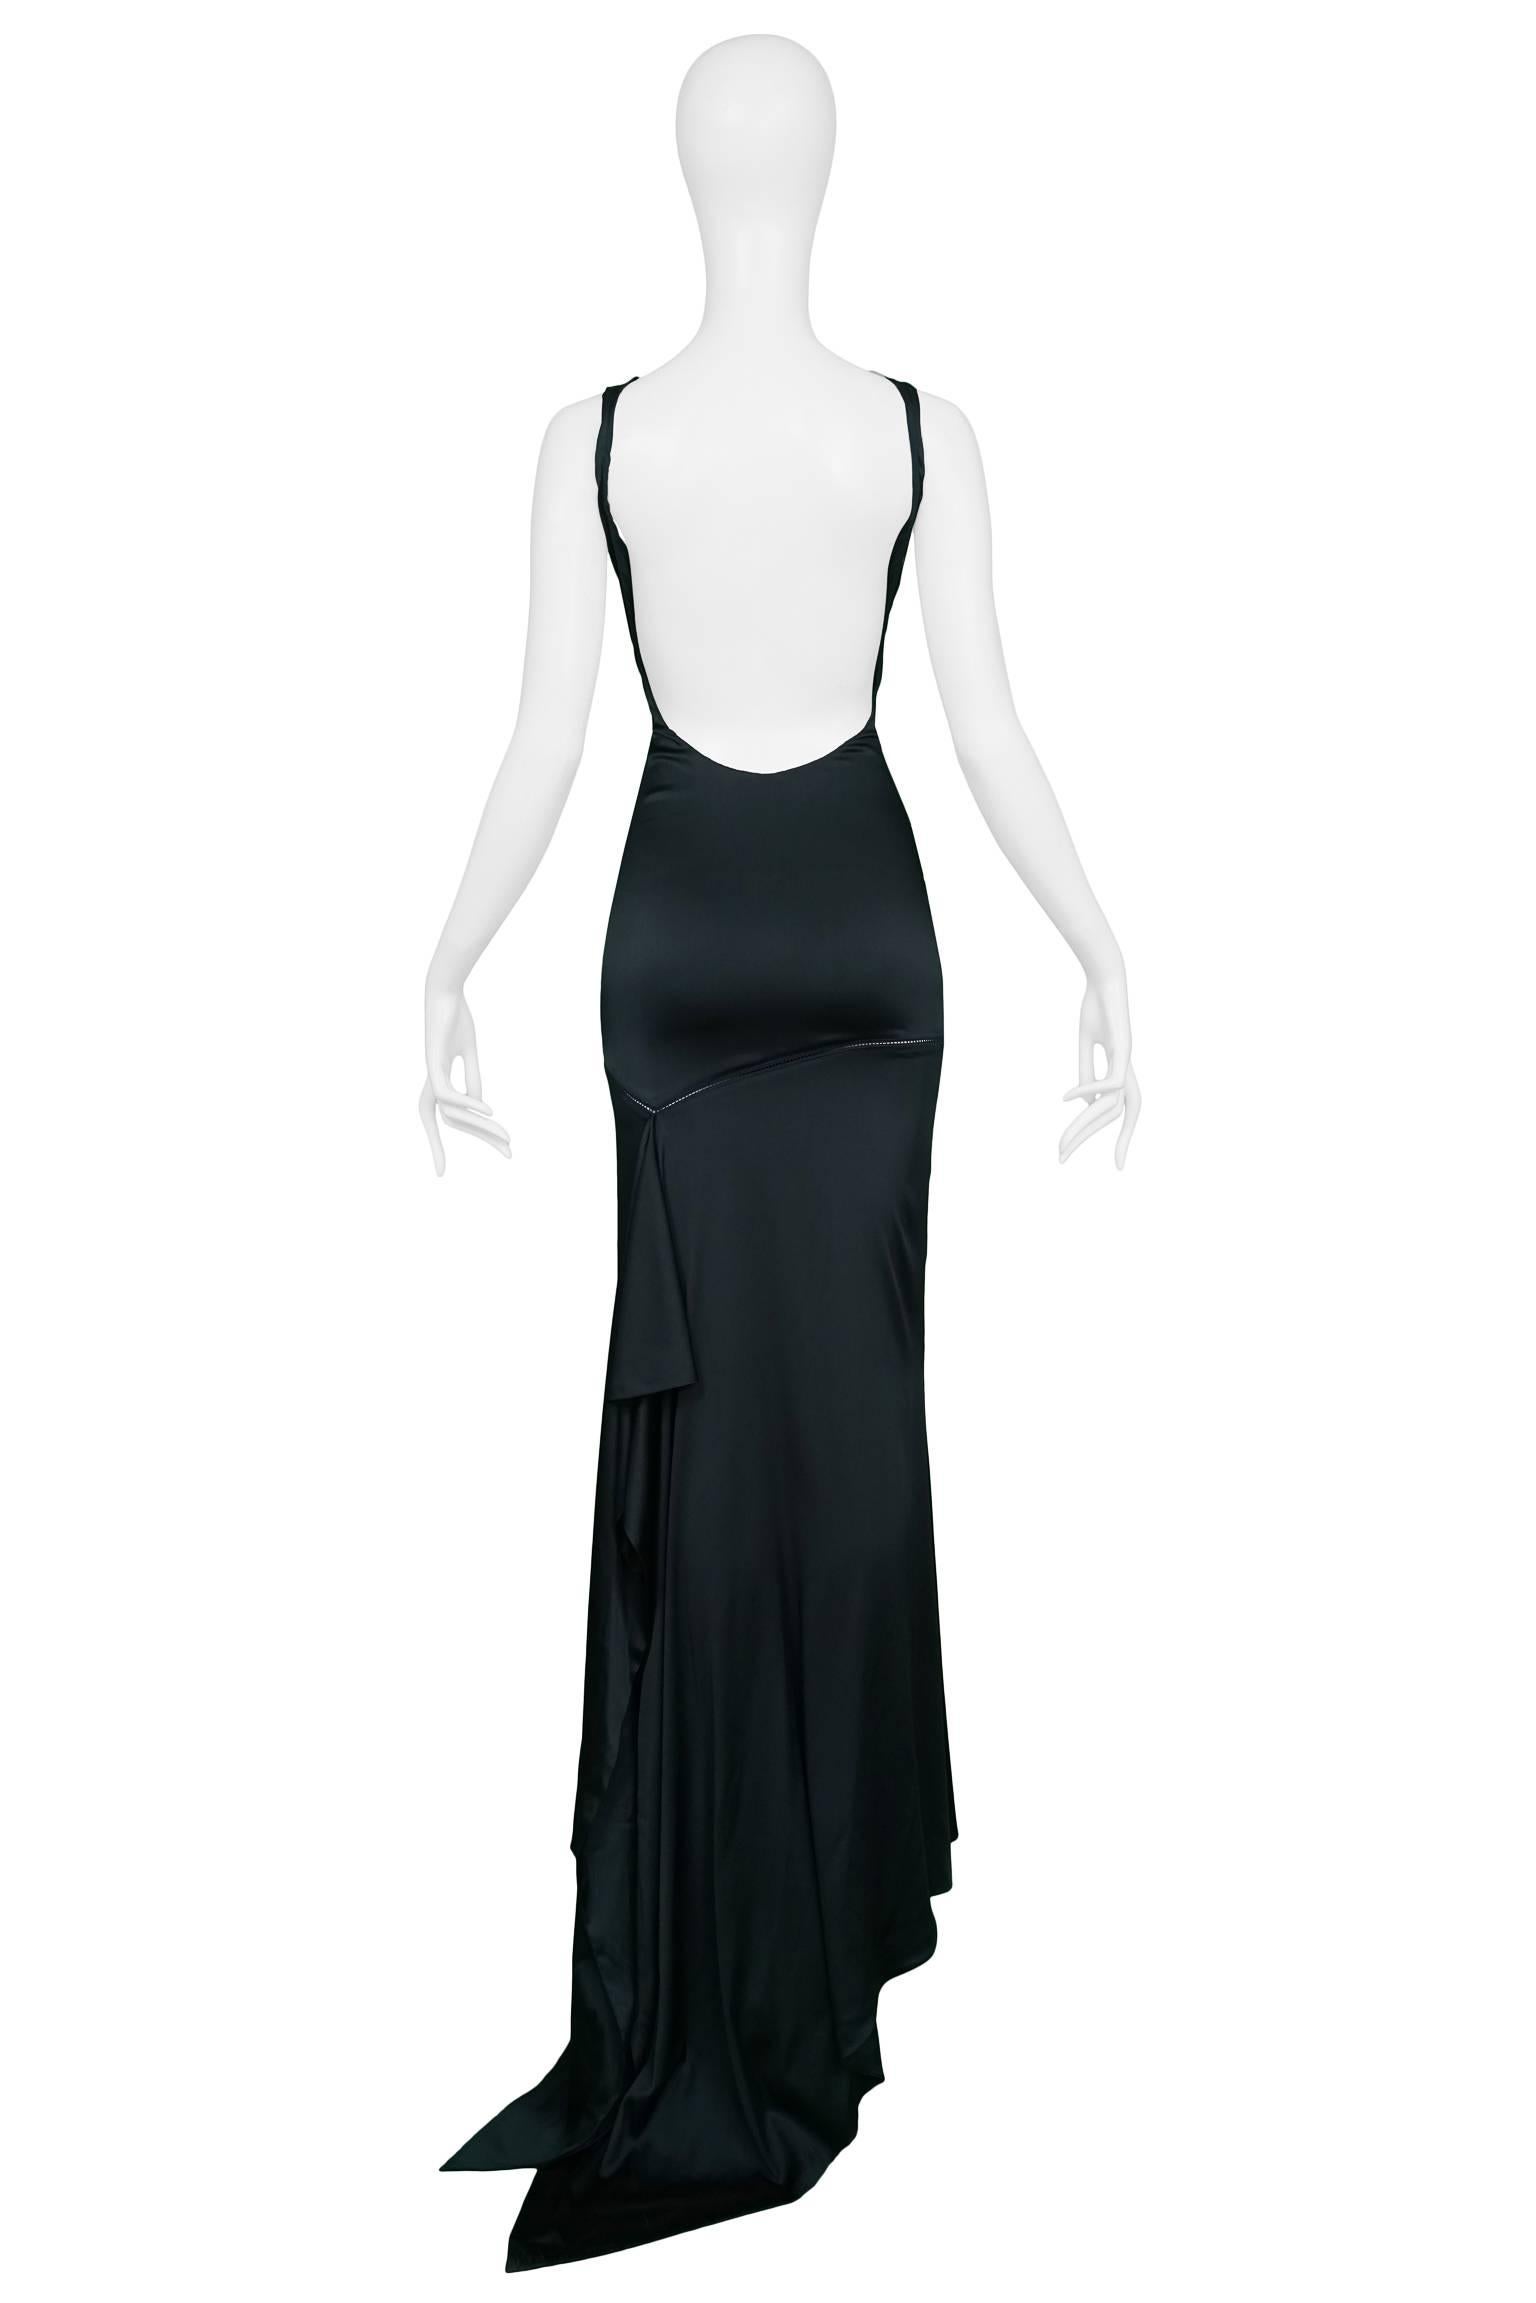 Tom Ford for Gucci Dark Green Satin Backless Evening Gown In Excellent Condition In Los Angeles, CA